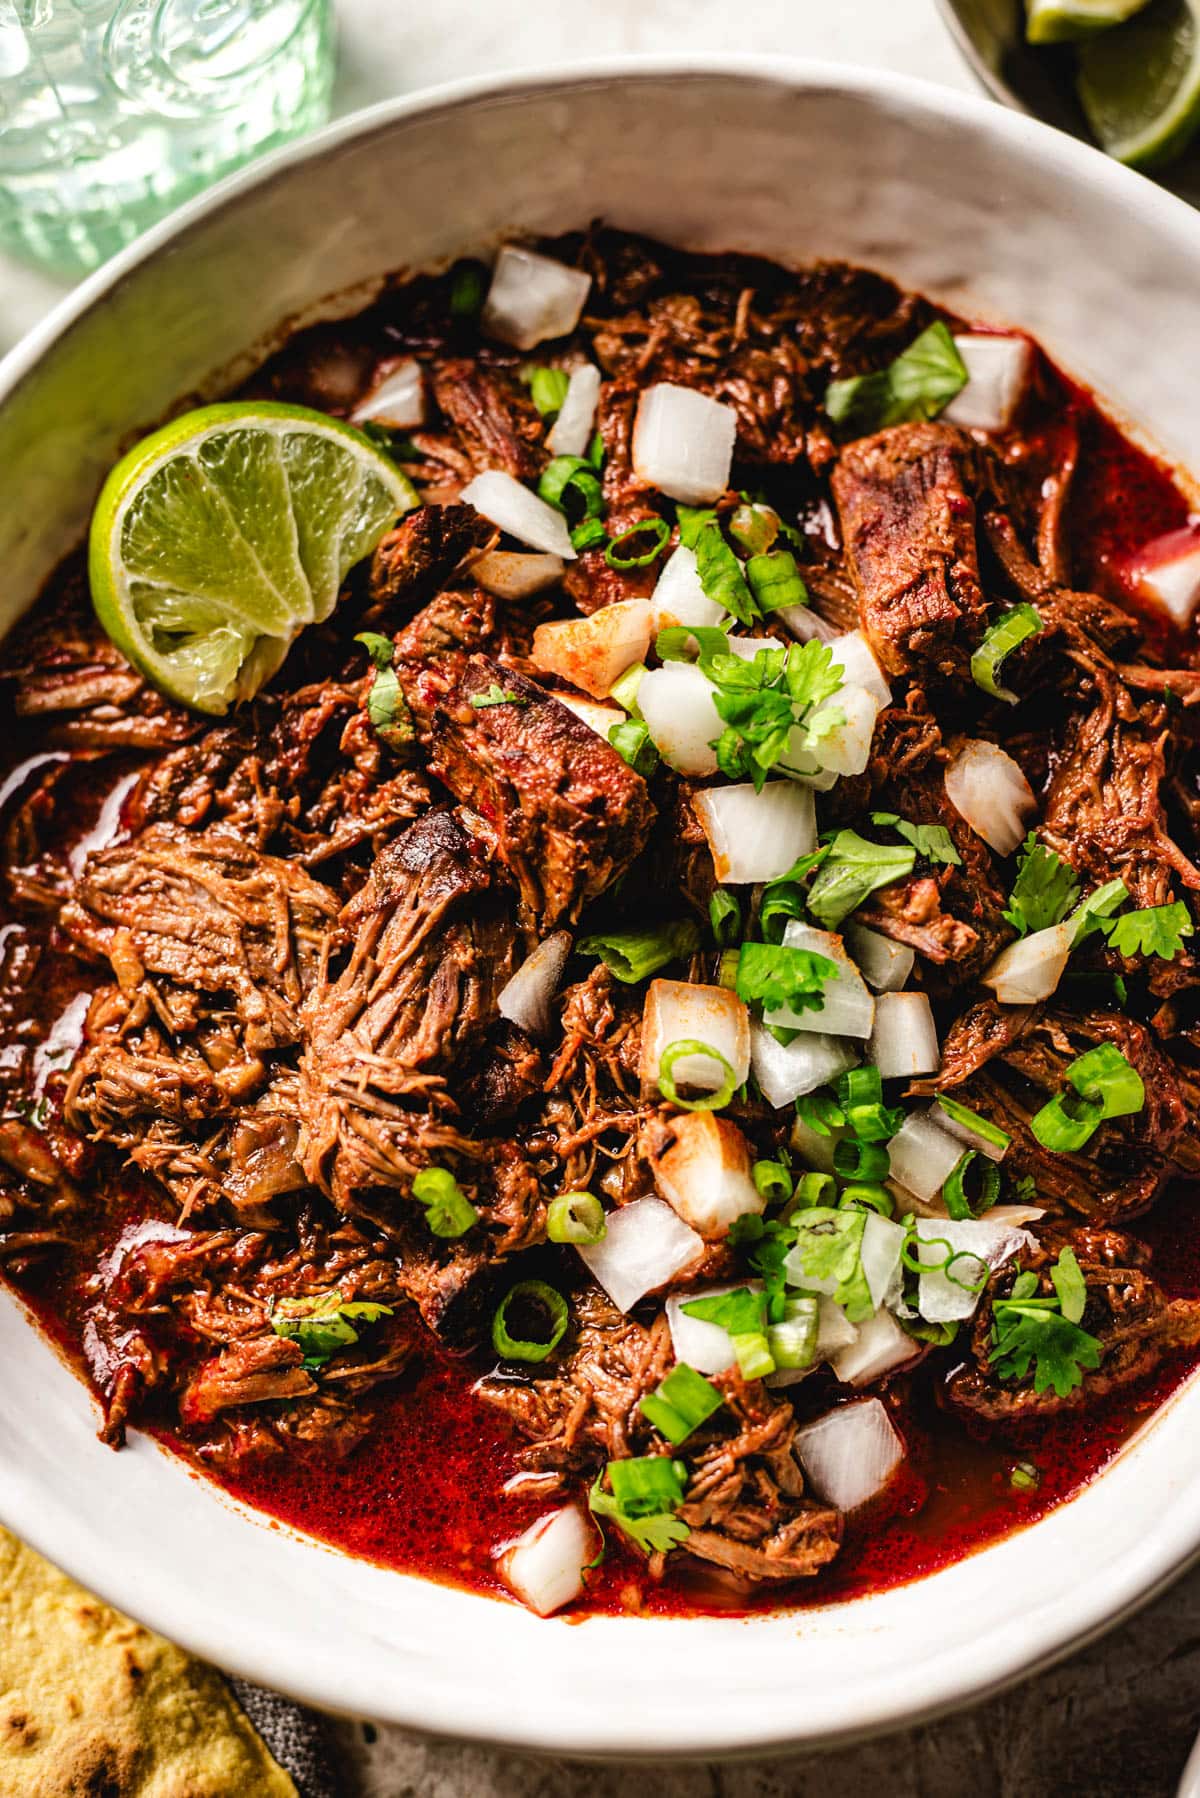 A close up of a bowl of birria de res with chopped onion and herb toppings